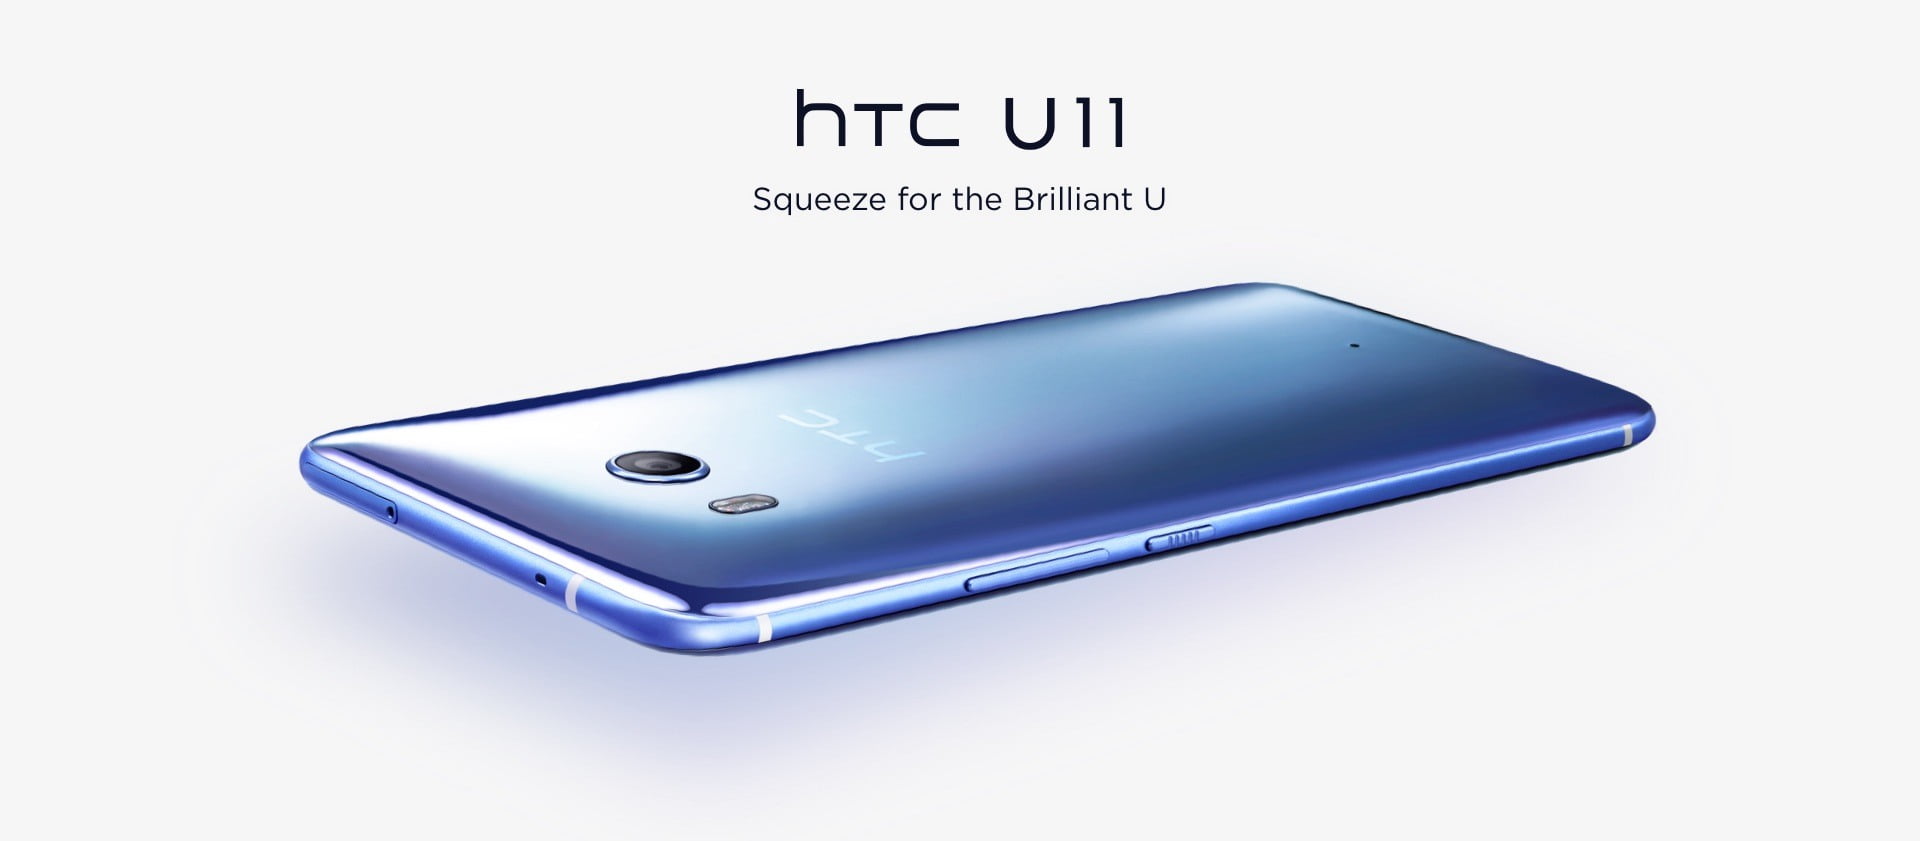 HTC U11 officially launched in India for Rs. 51990